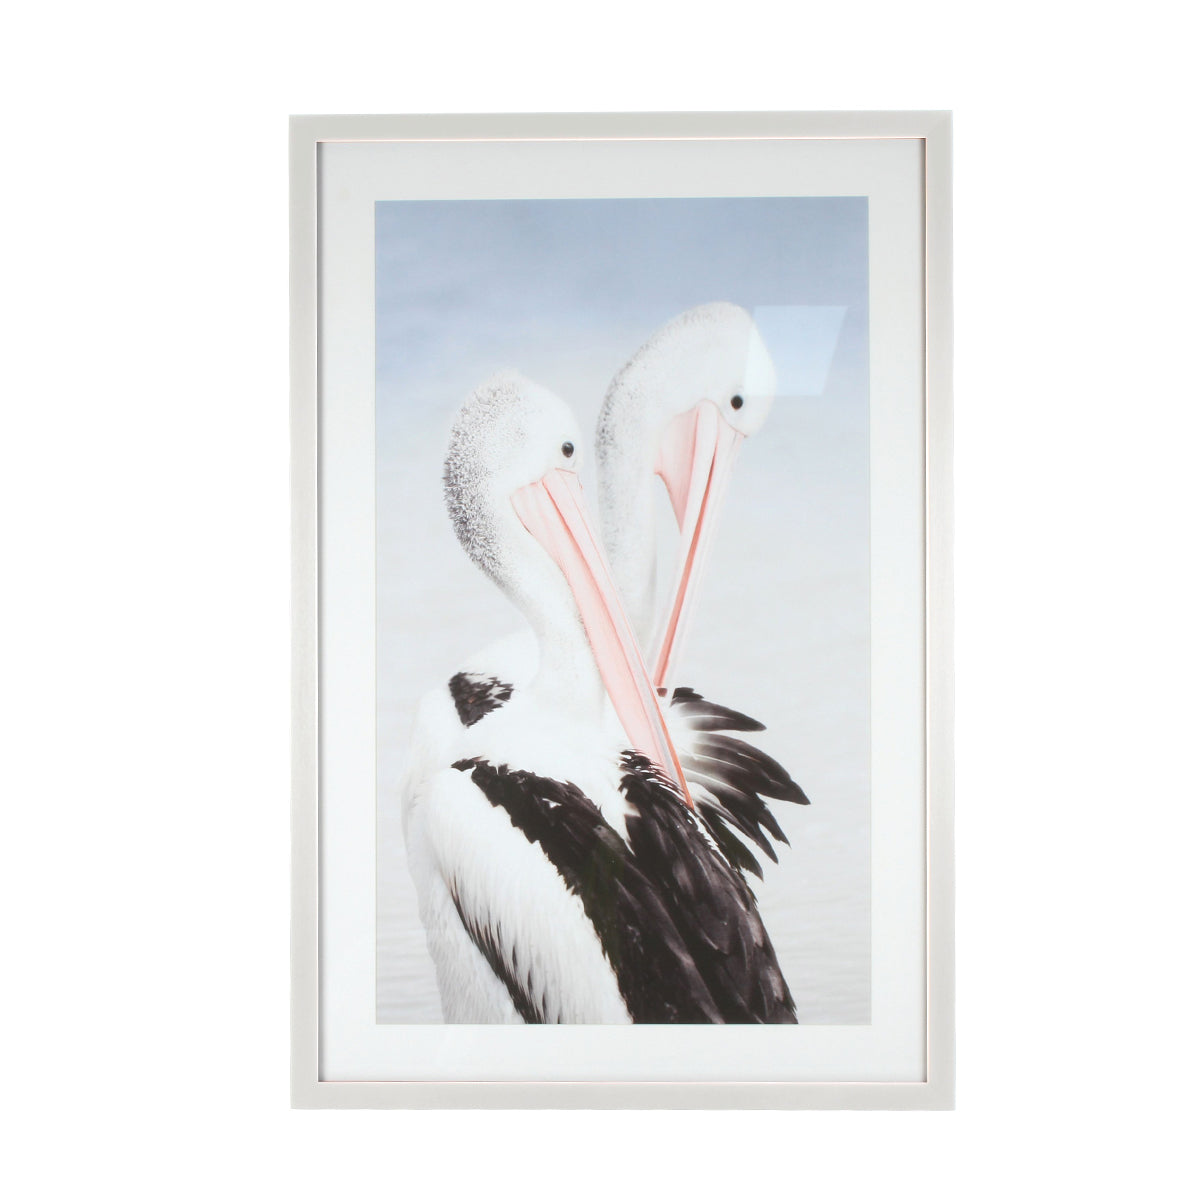 Hede Pair Of Pelicans Art Framed In Glass 90 x 60cm